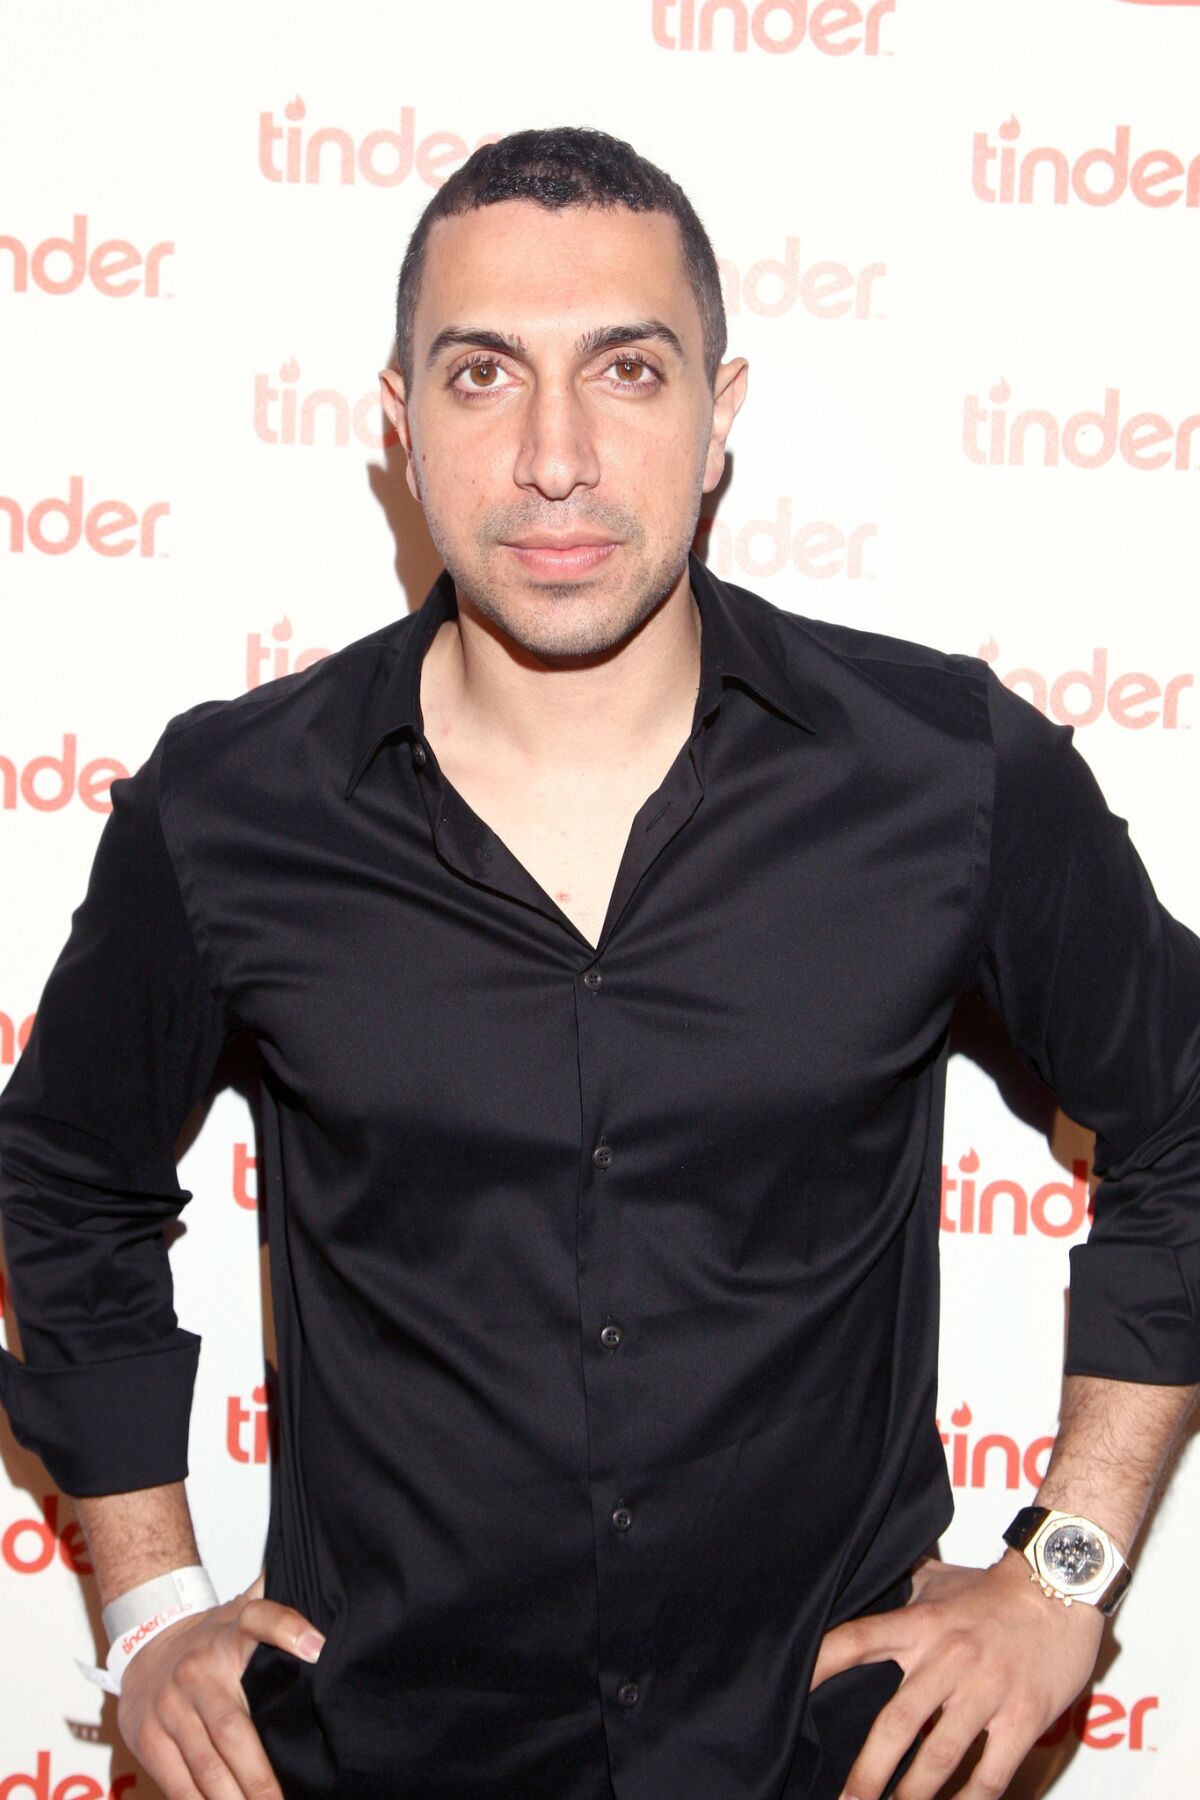 Tinder cofounder Sean Rad is on Forbes' 30 Under 30 list. Tinder and Forbes are partnering on a business networking app for similarly successful young executives.